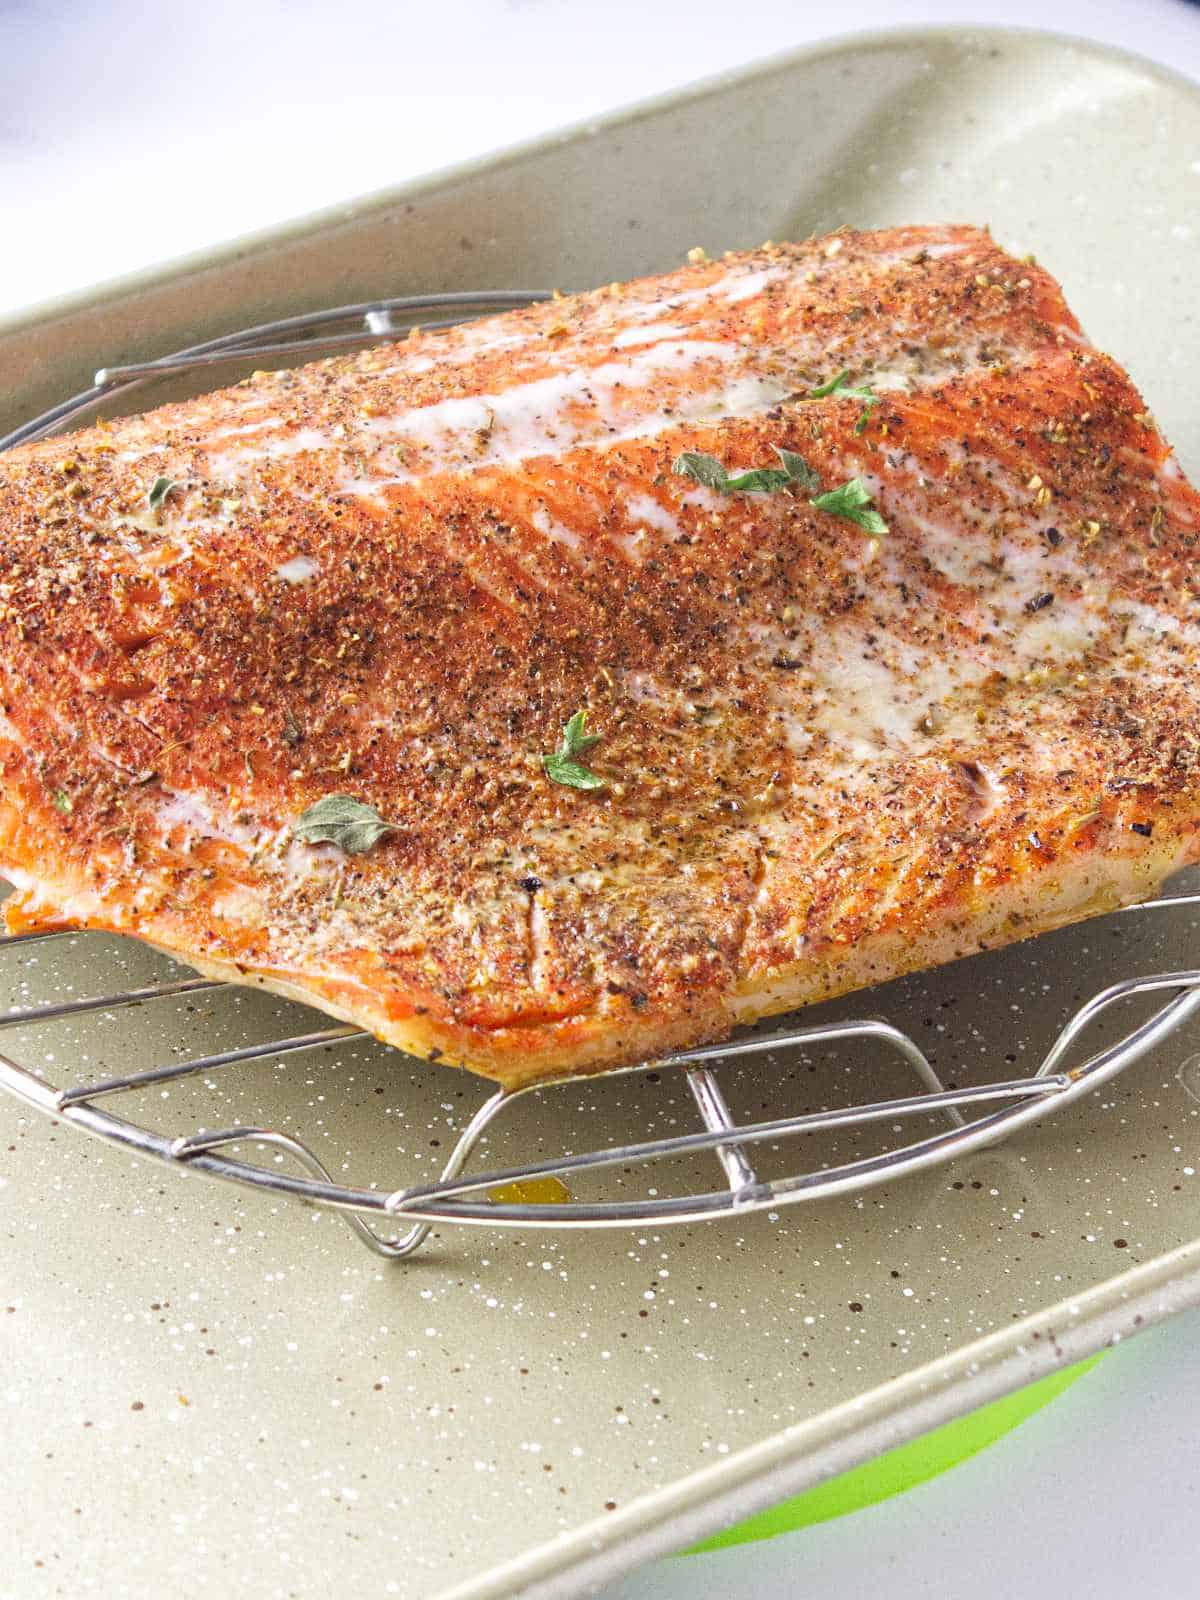 cooked salmon filet on a baking rack.